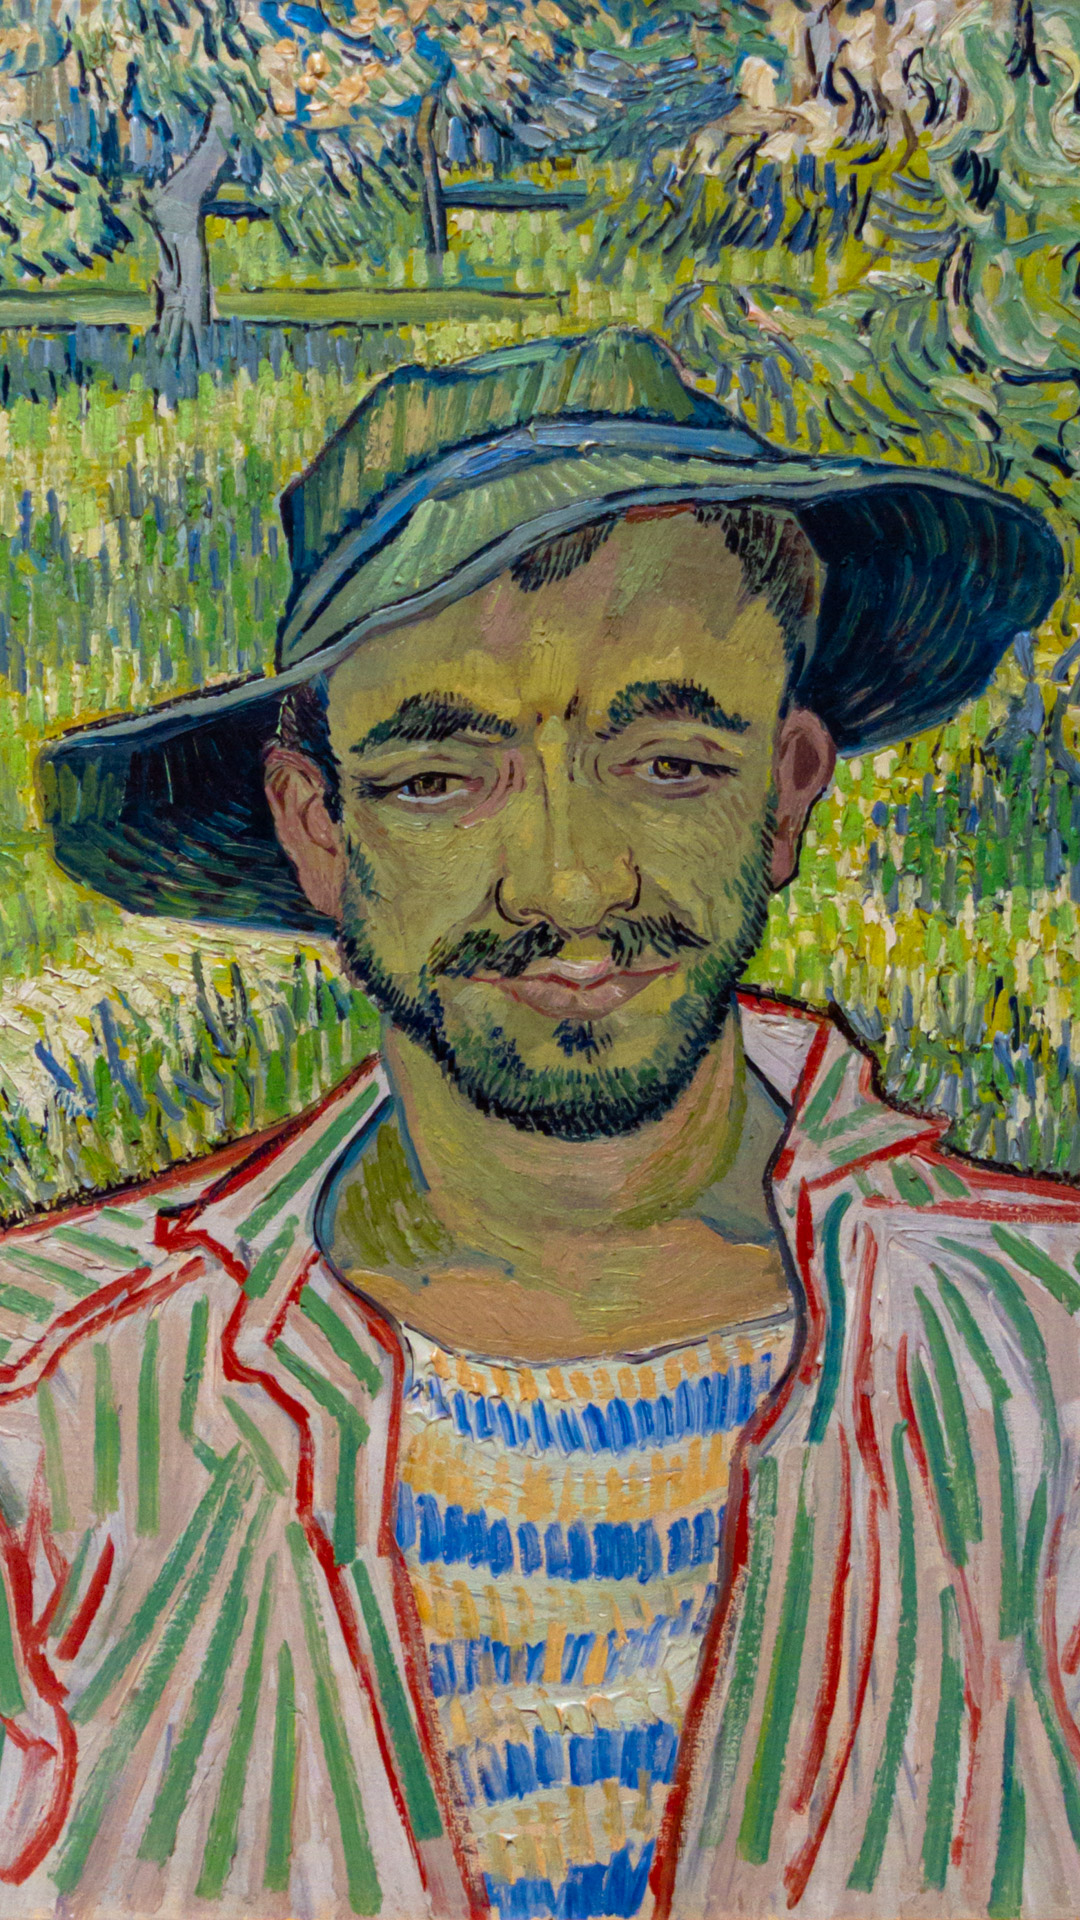 Download the Portrait of a Young Peasant iphone wallpaper and admire the expressive face and vivid colors of Van Gogh’s painting.